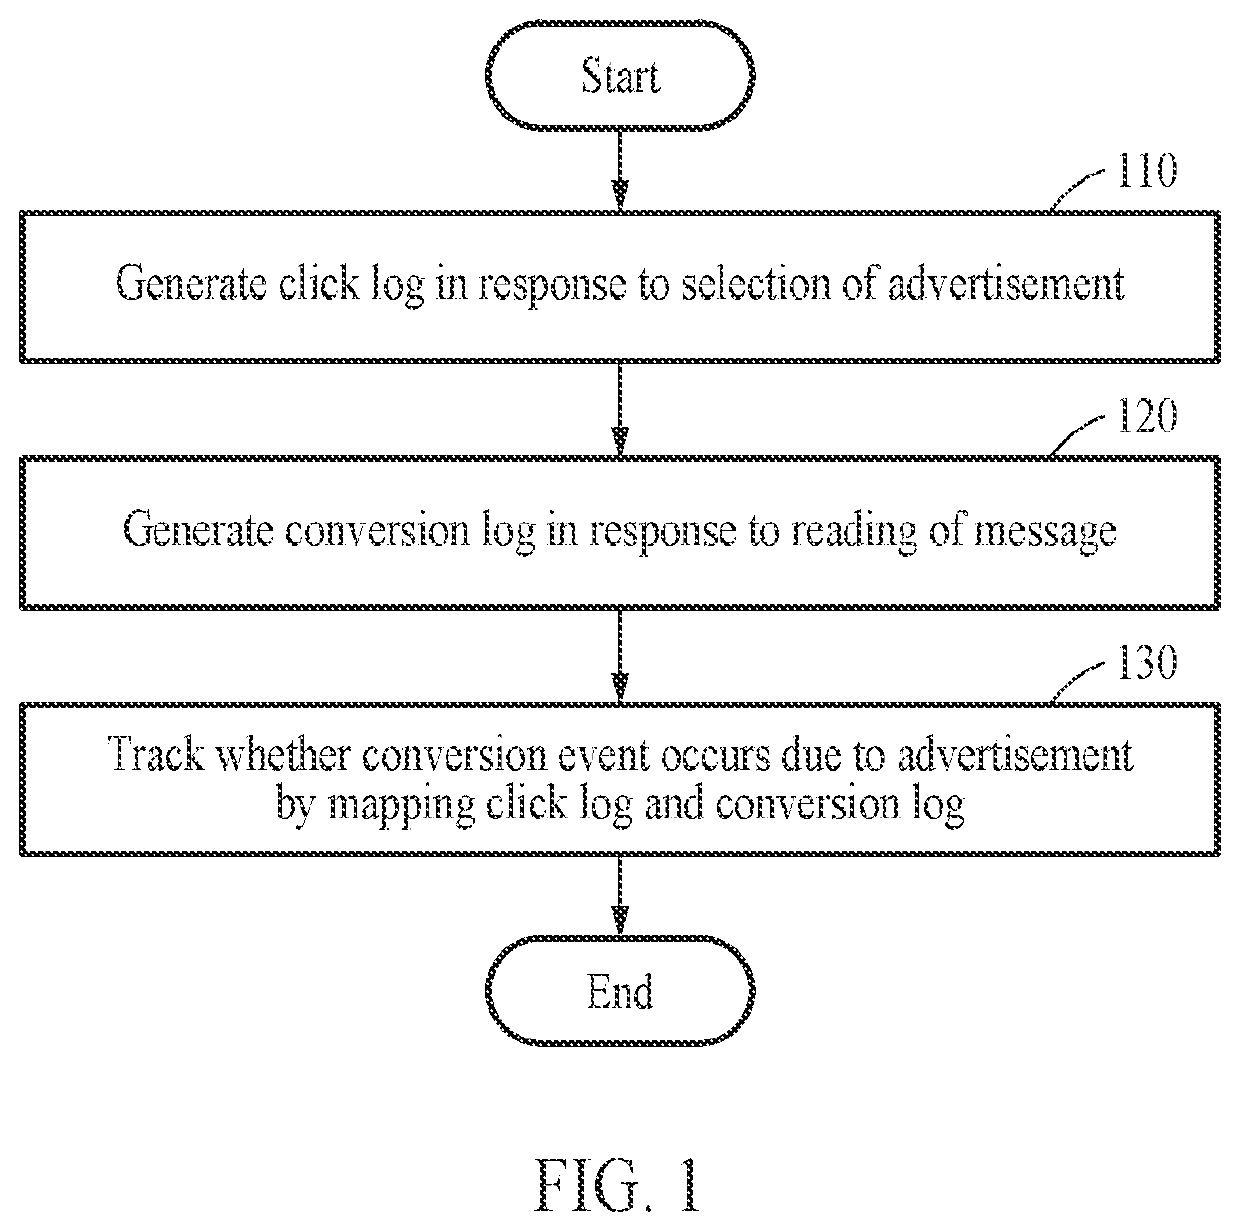 Method and apparatus for tracking conversion of advertisements provided through application